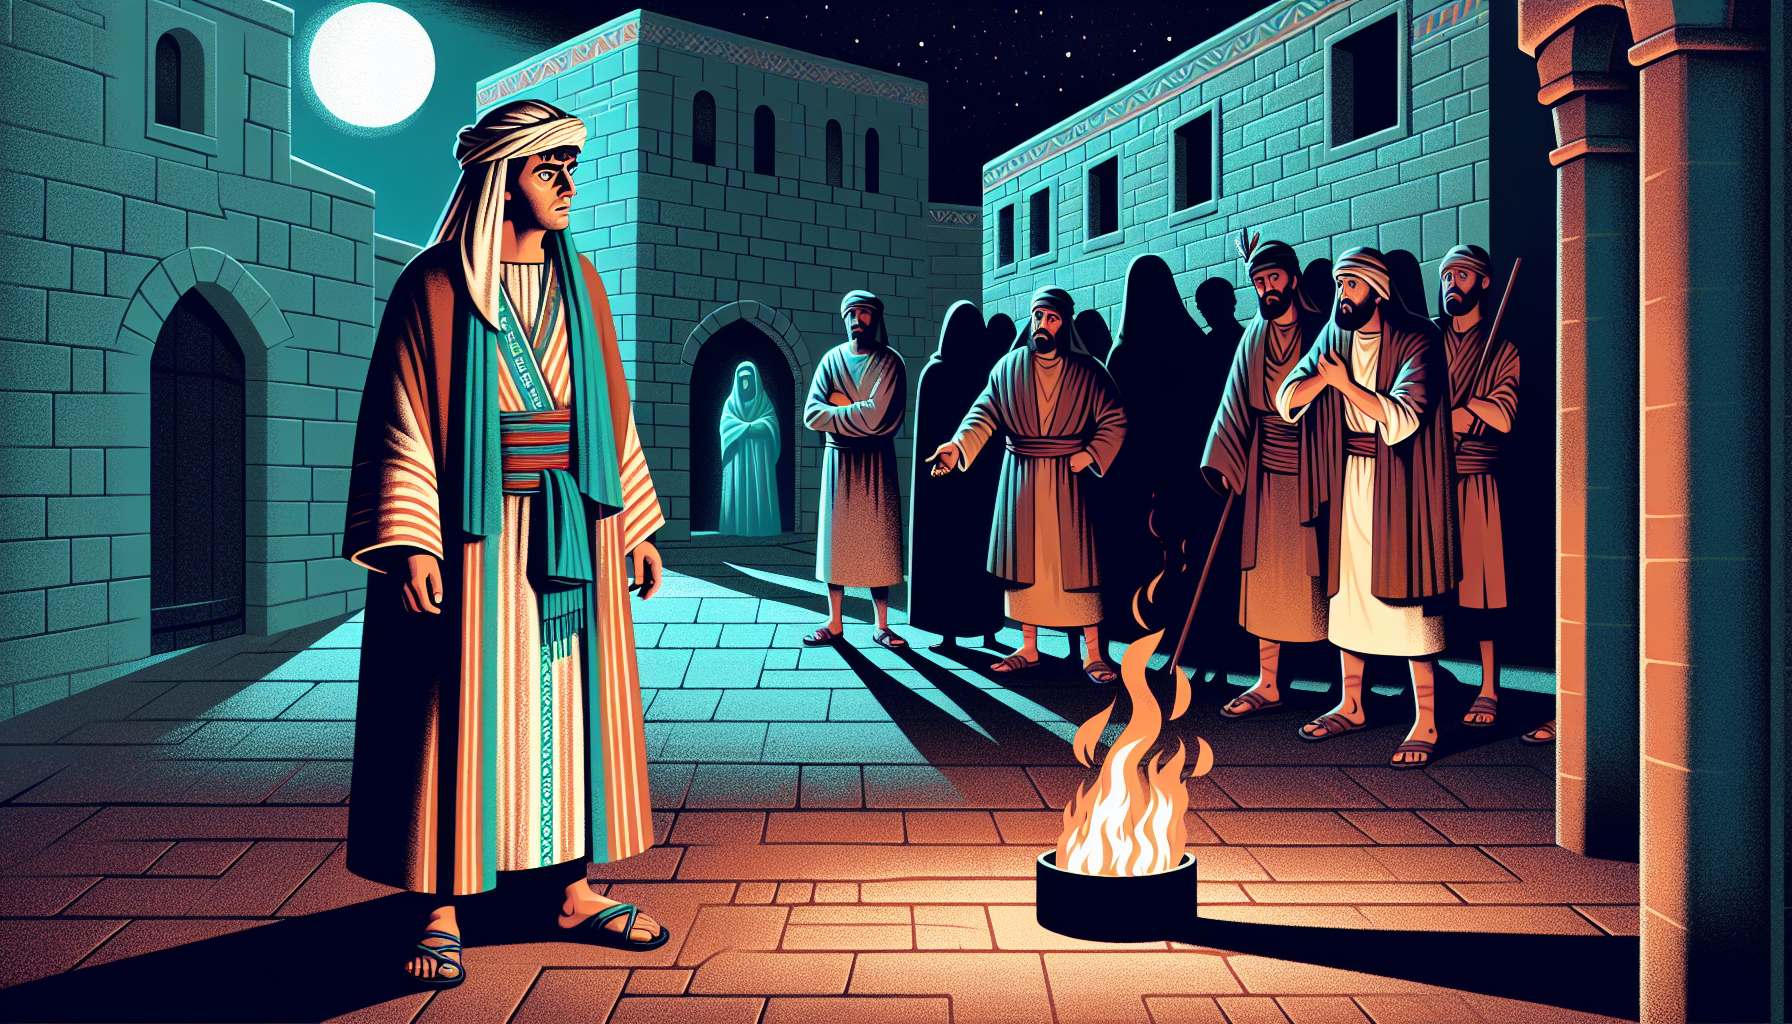 Create an image depicting the biblical scene of Peter's denials of Jesus, found in John 18:15-27. Show Peter, dressed in ancient Middle Eastern attire, standing around a courtyard fire at night with s